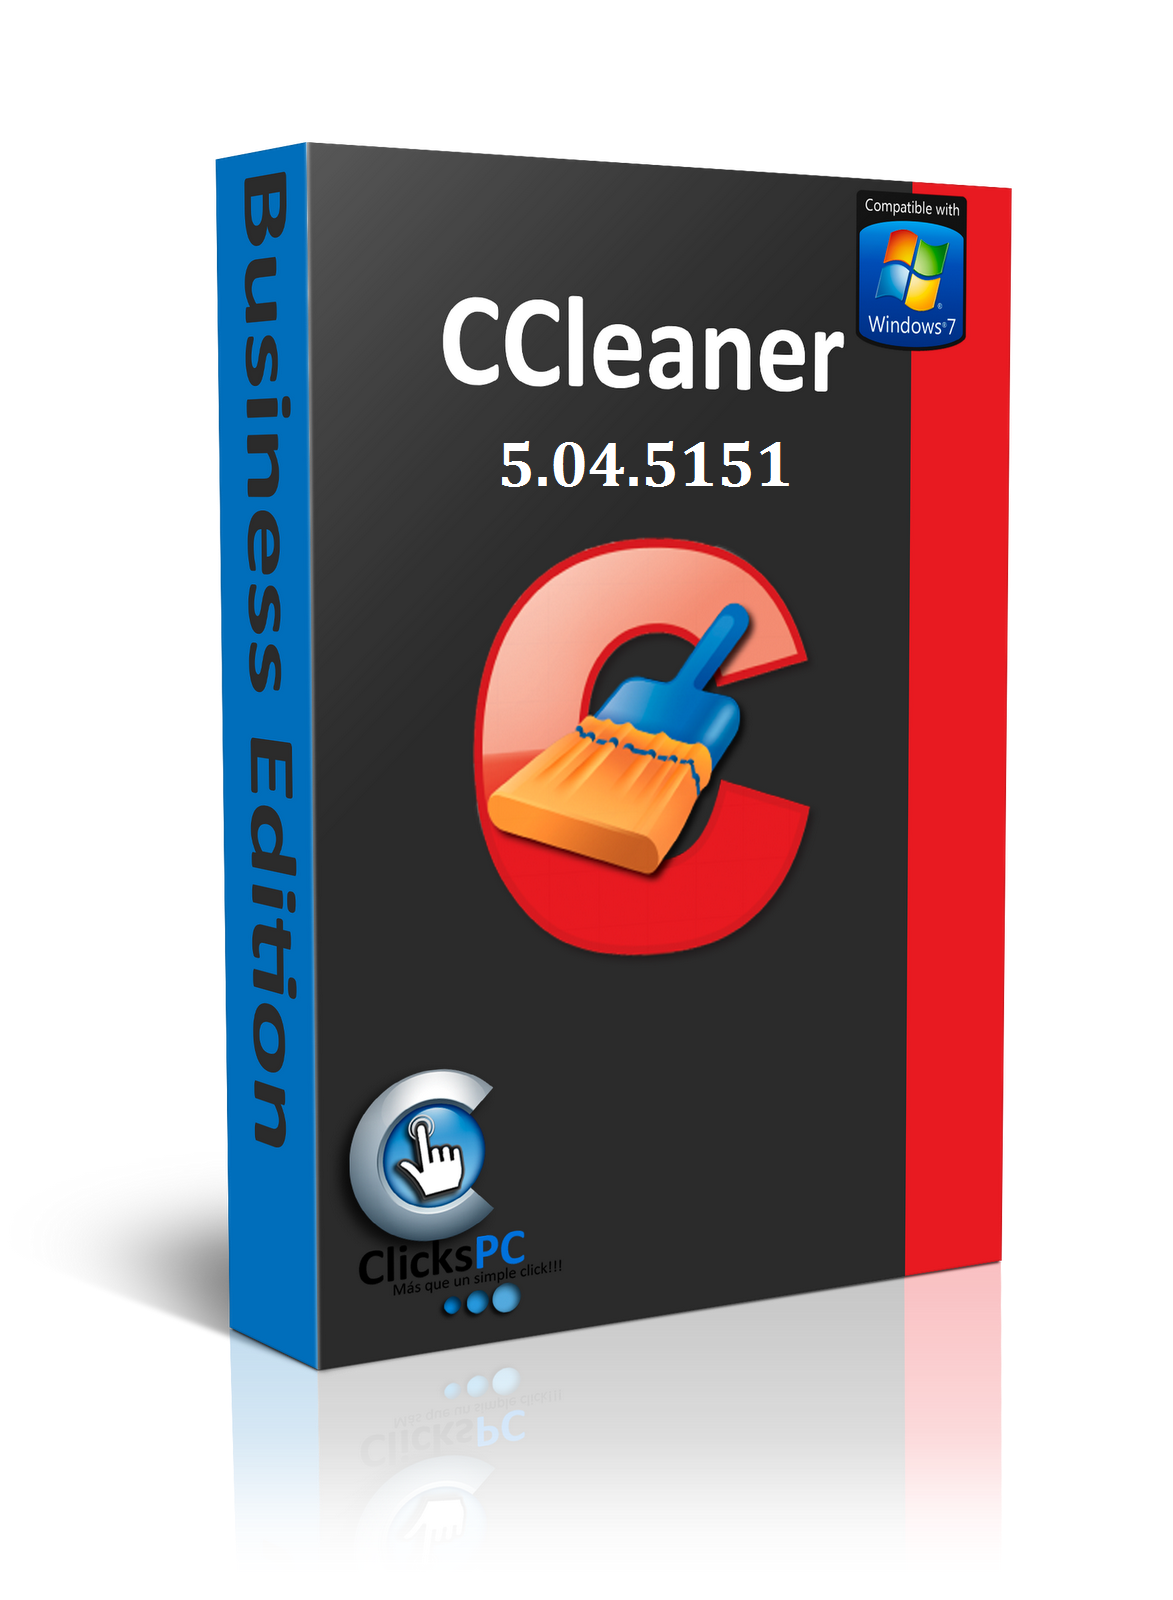 CCleaner 5.04.5151 Full With Crack